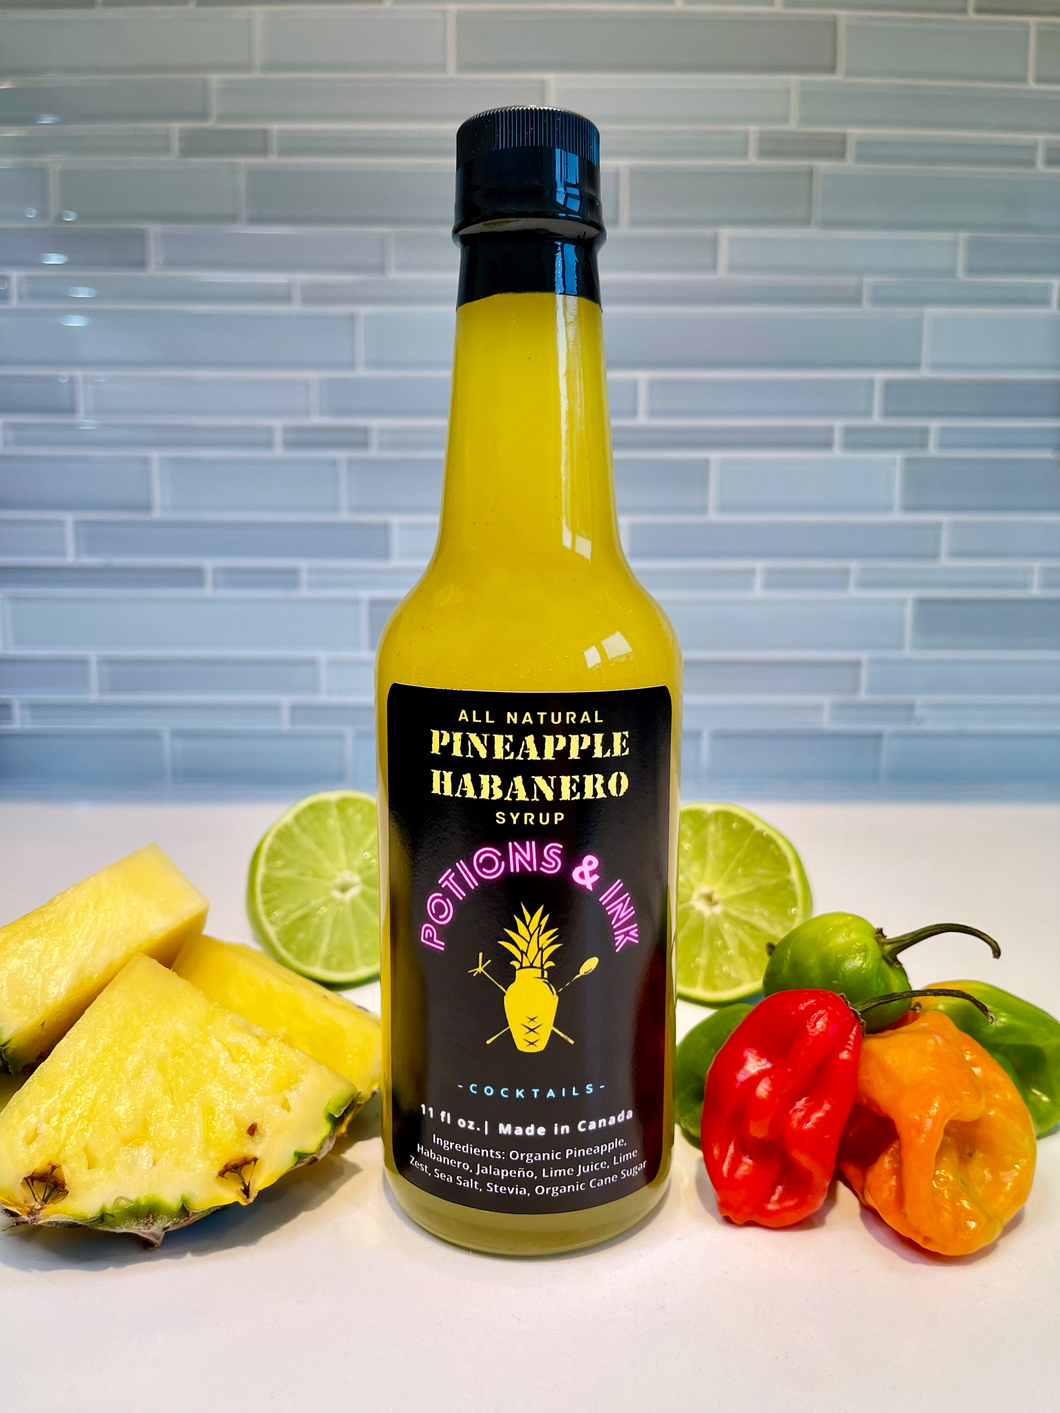 NEW-All Natural Pineapple Habanero Syrup